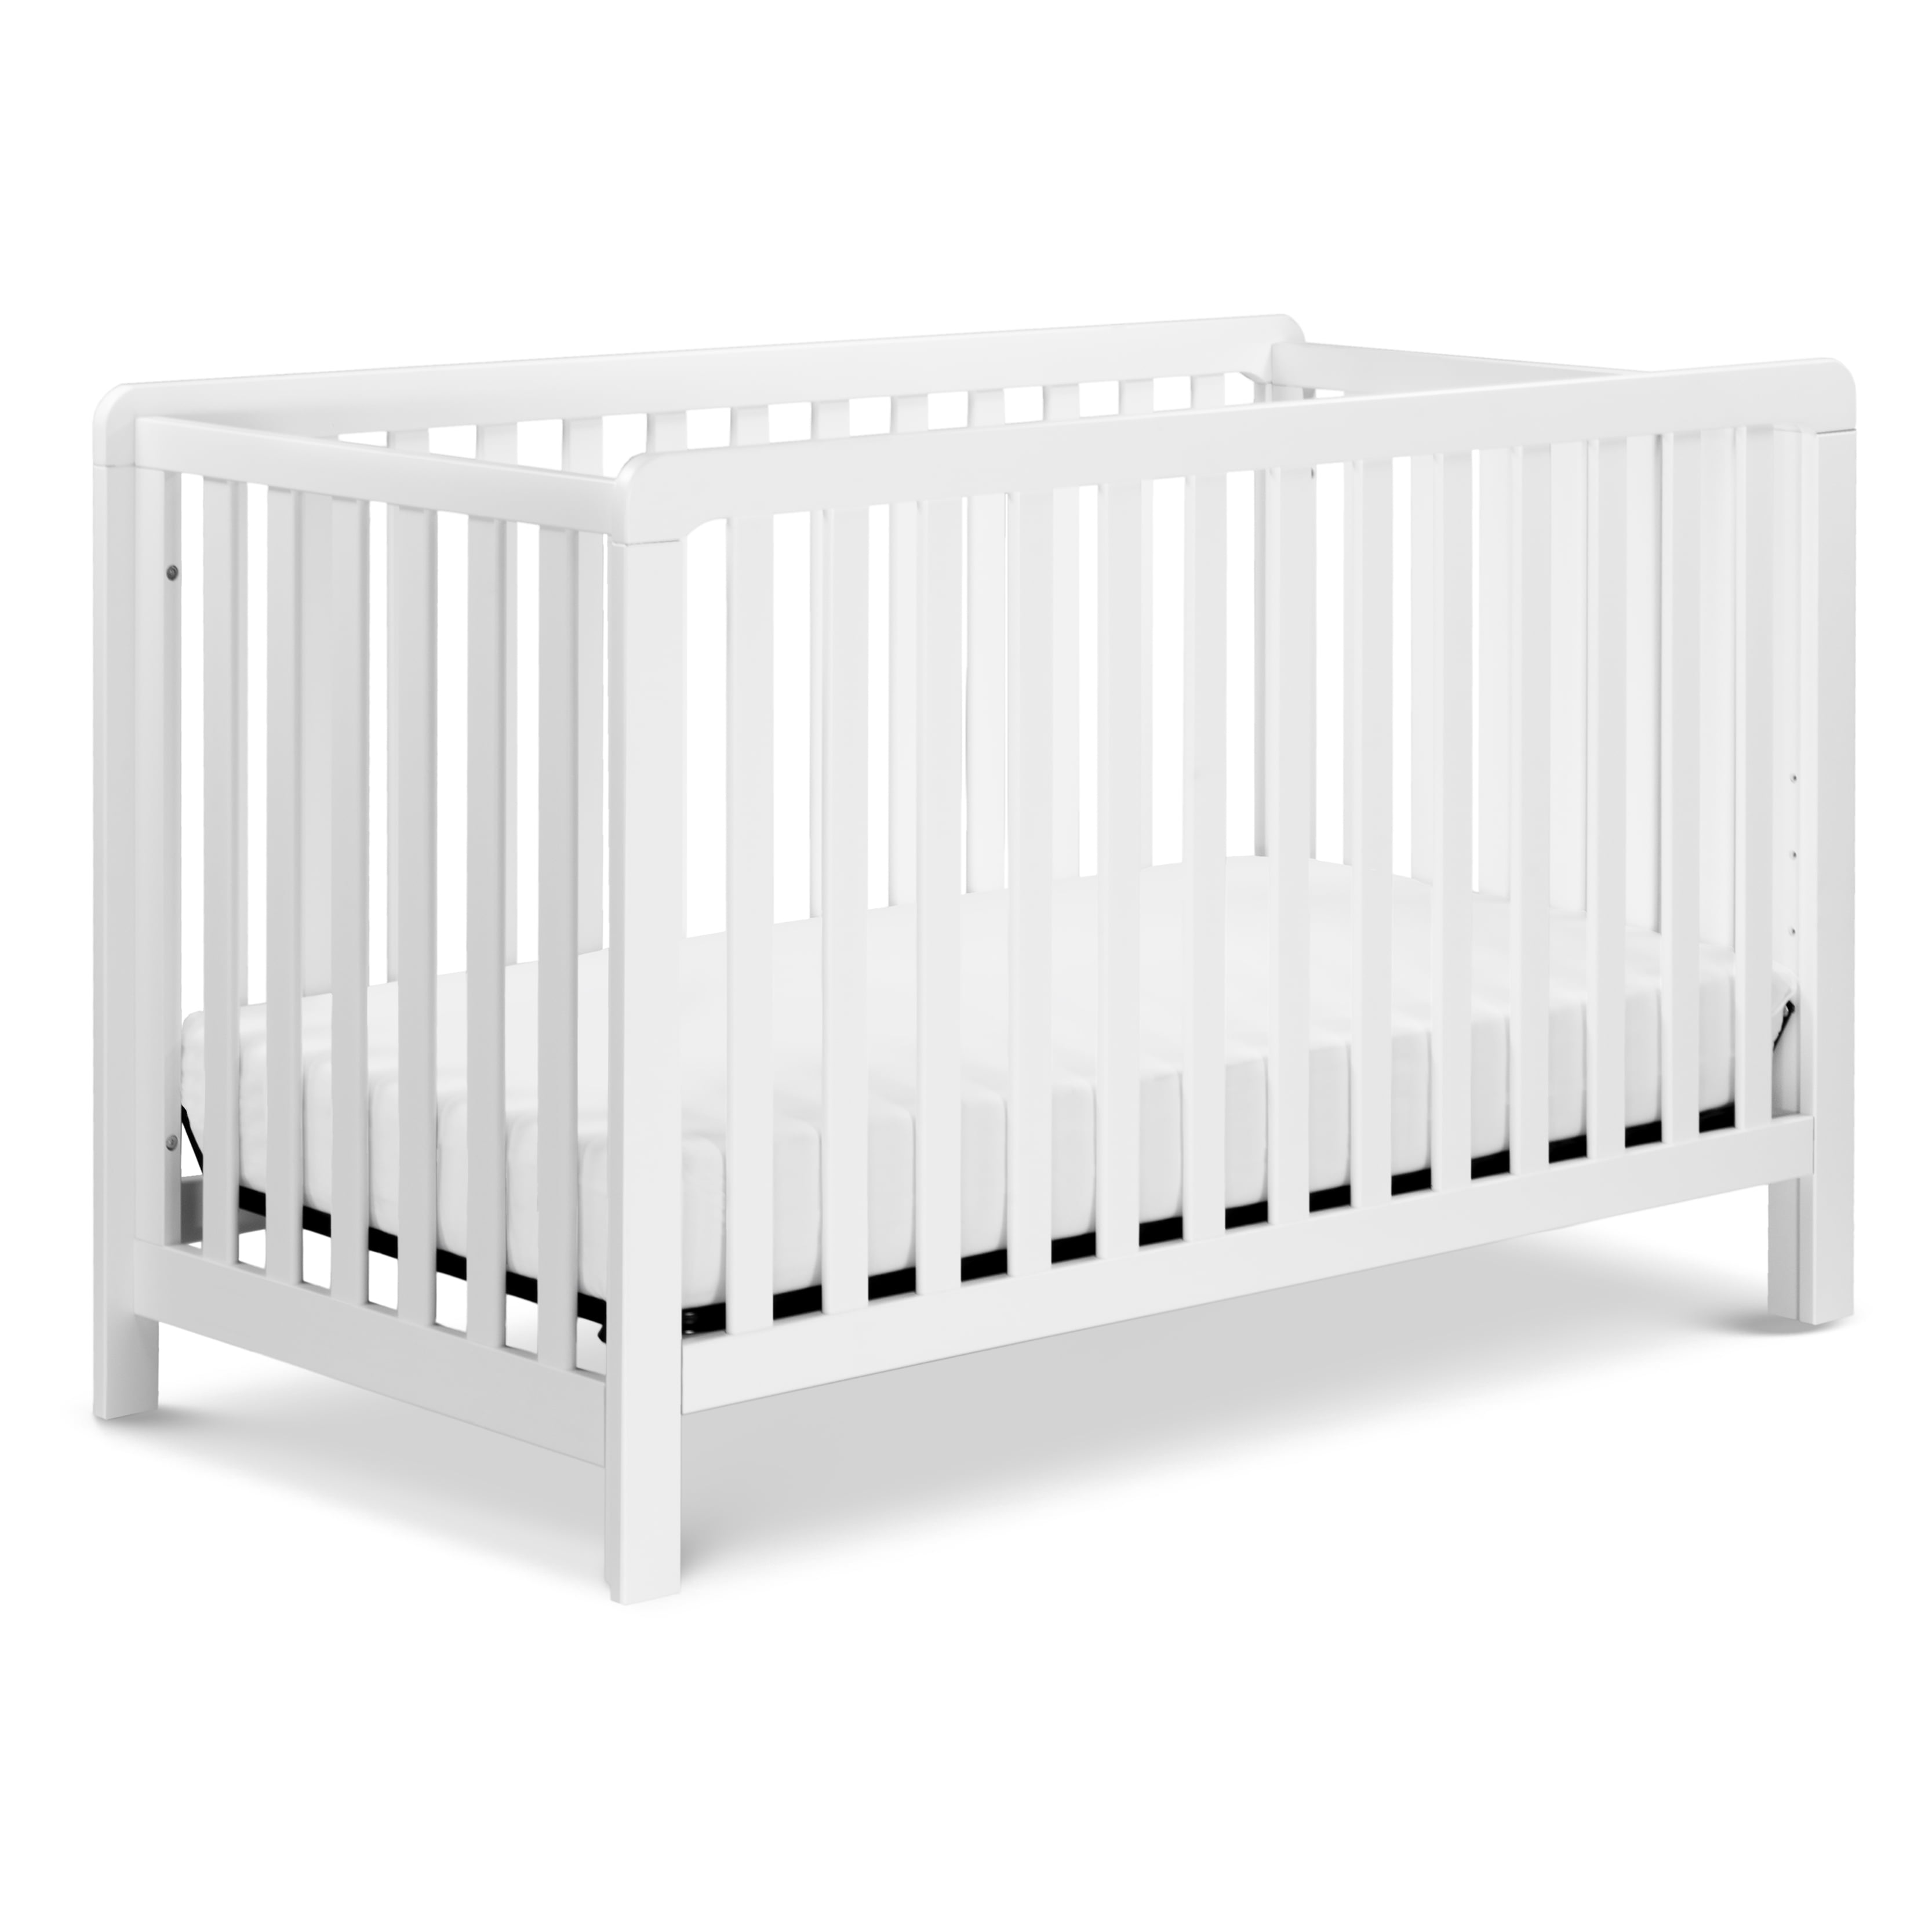 Carter's by DaVinci Colby 4in1 Convertible Crib in White